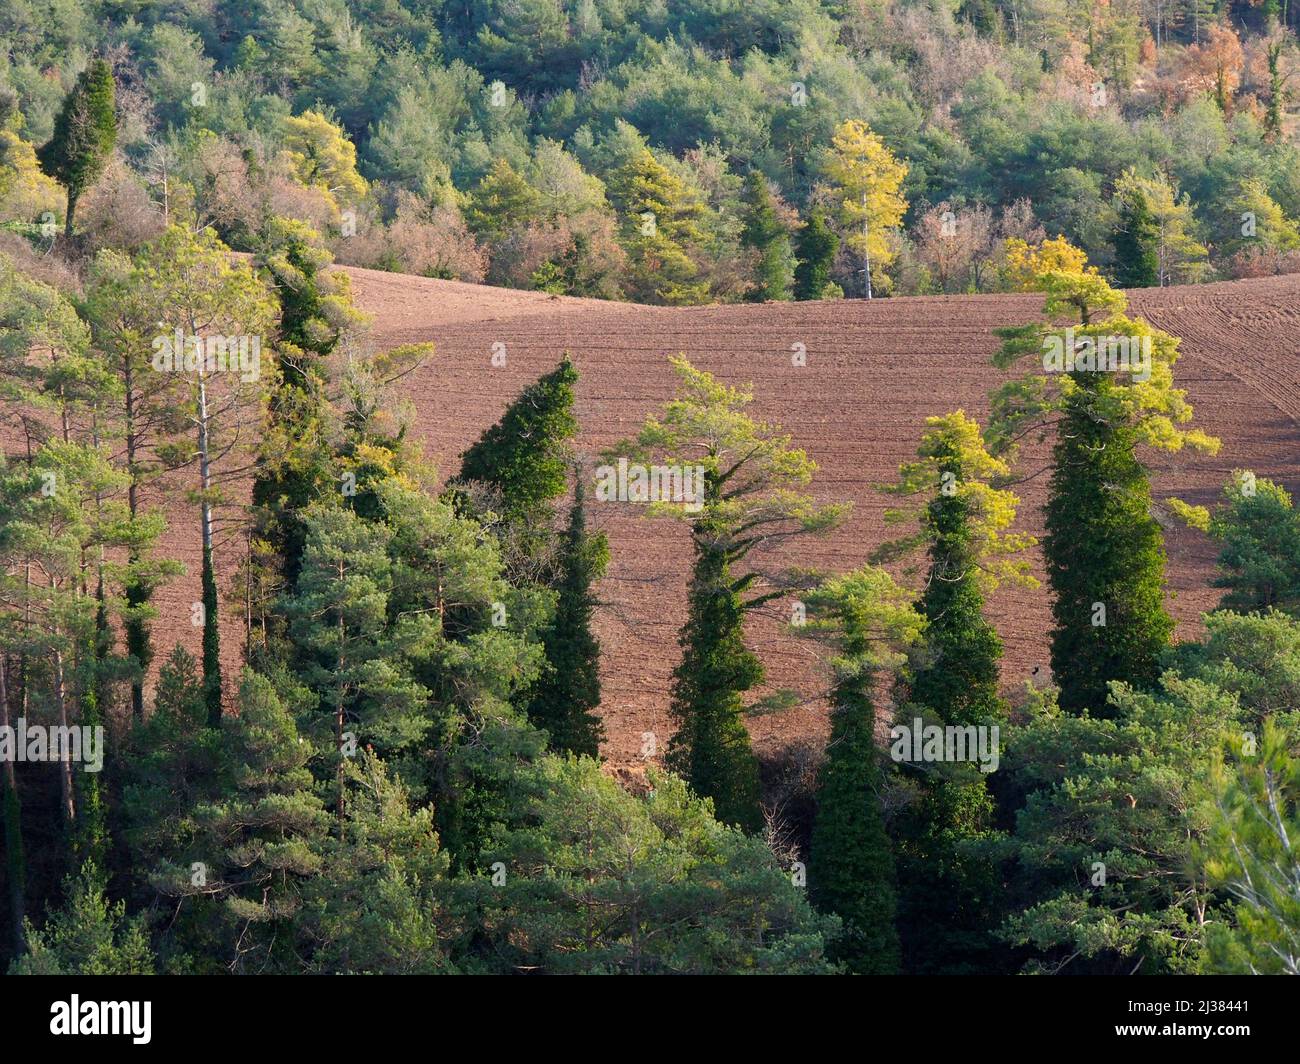 Ploughed fields and Pine trees covered by Common Ivy (Hedera helix). Olost village countryside. Lluçanès region, Barcelona province, Catalonia, Spain. Stock Photo